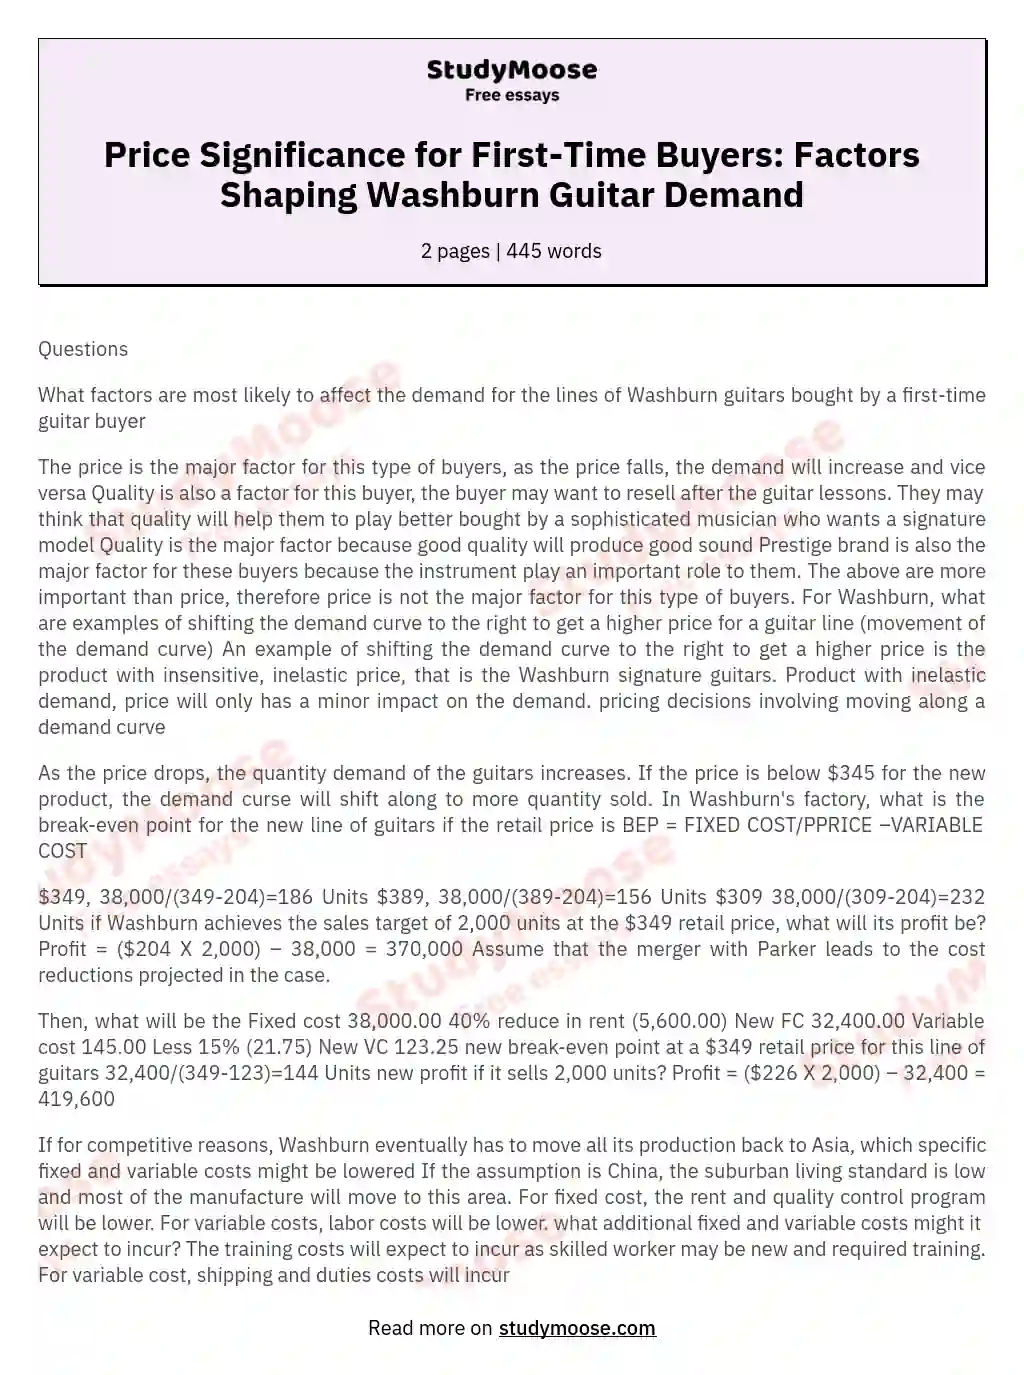 Price Significance for First-Time Buyers: Factors Shaping Washburn Guitar Demand essay